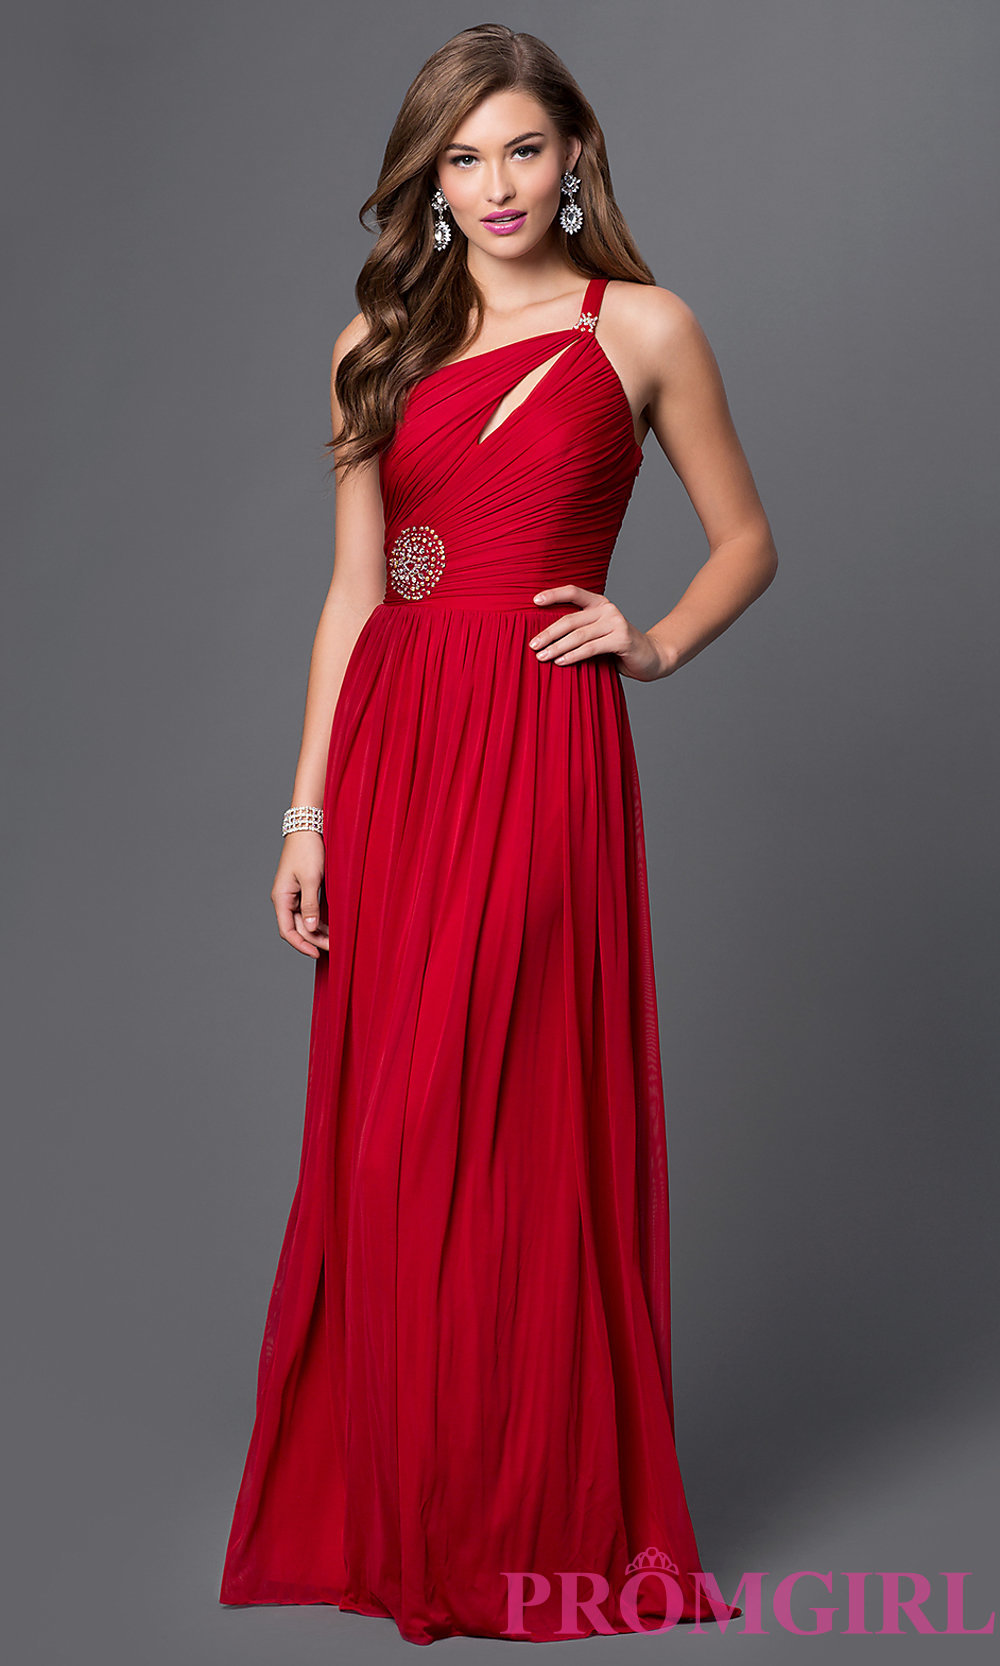 One Shoulder Red Bridesmaid Dresses : Make Your Evening Special